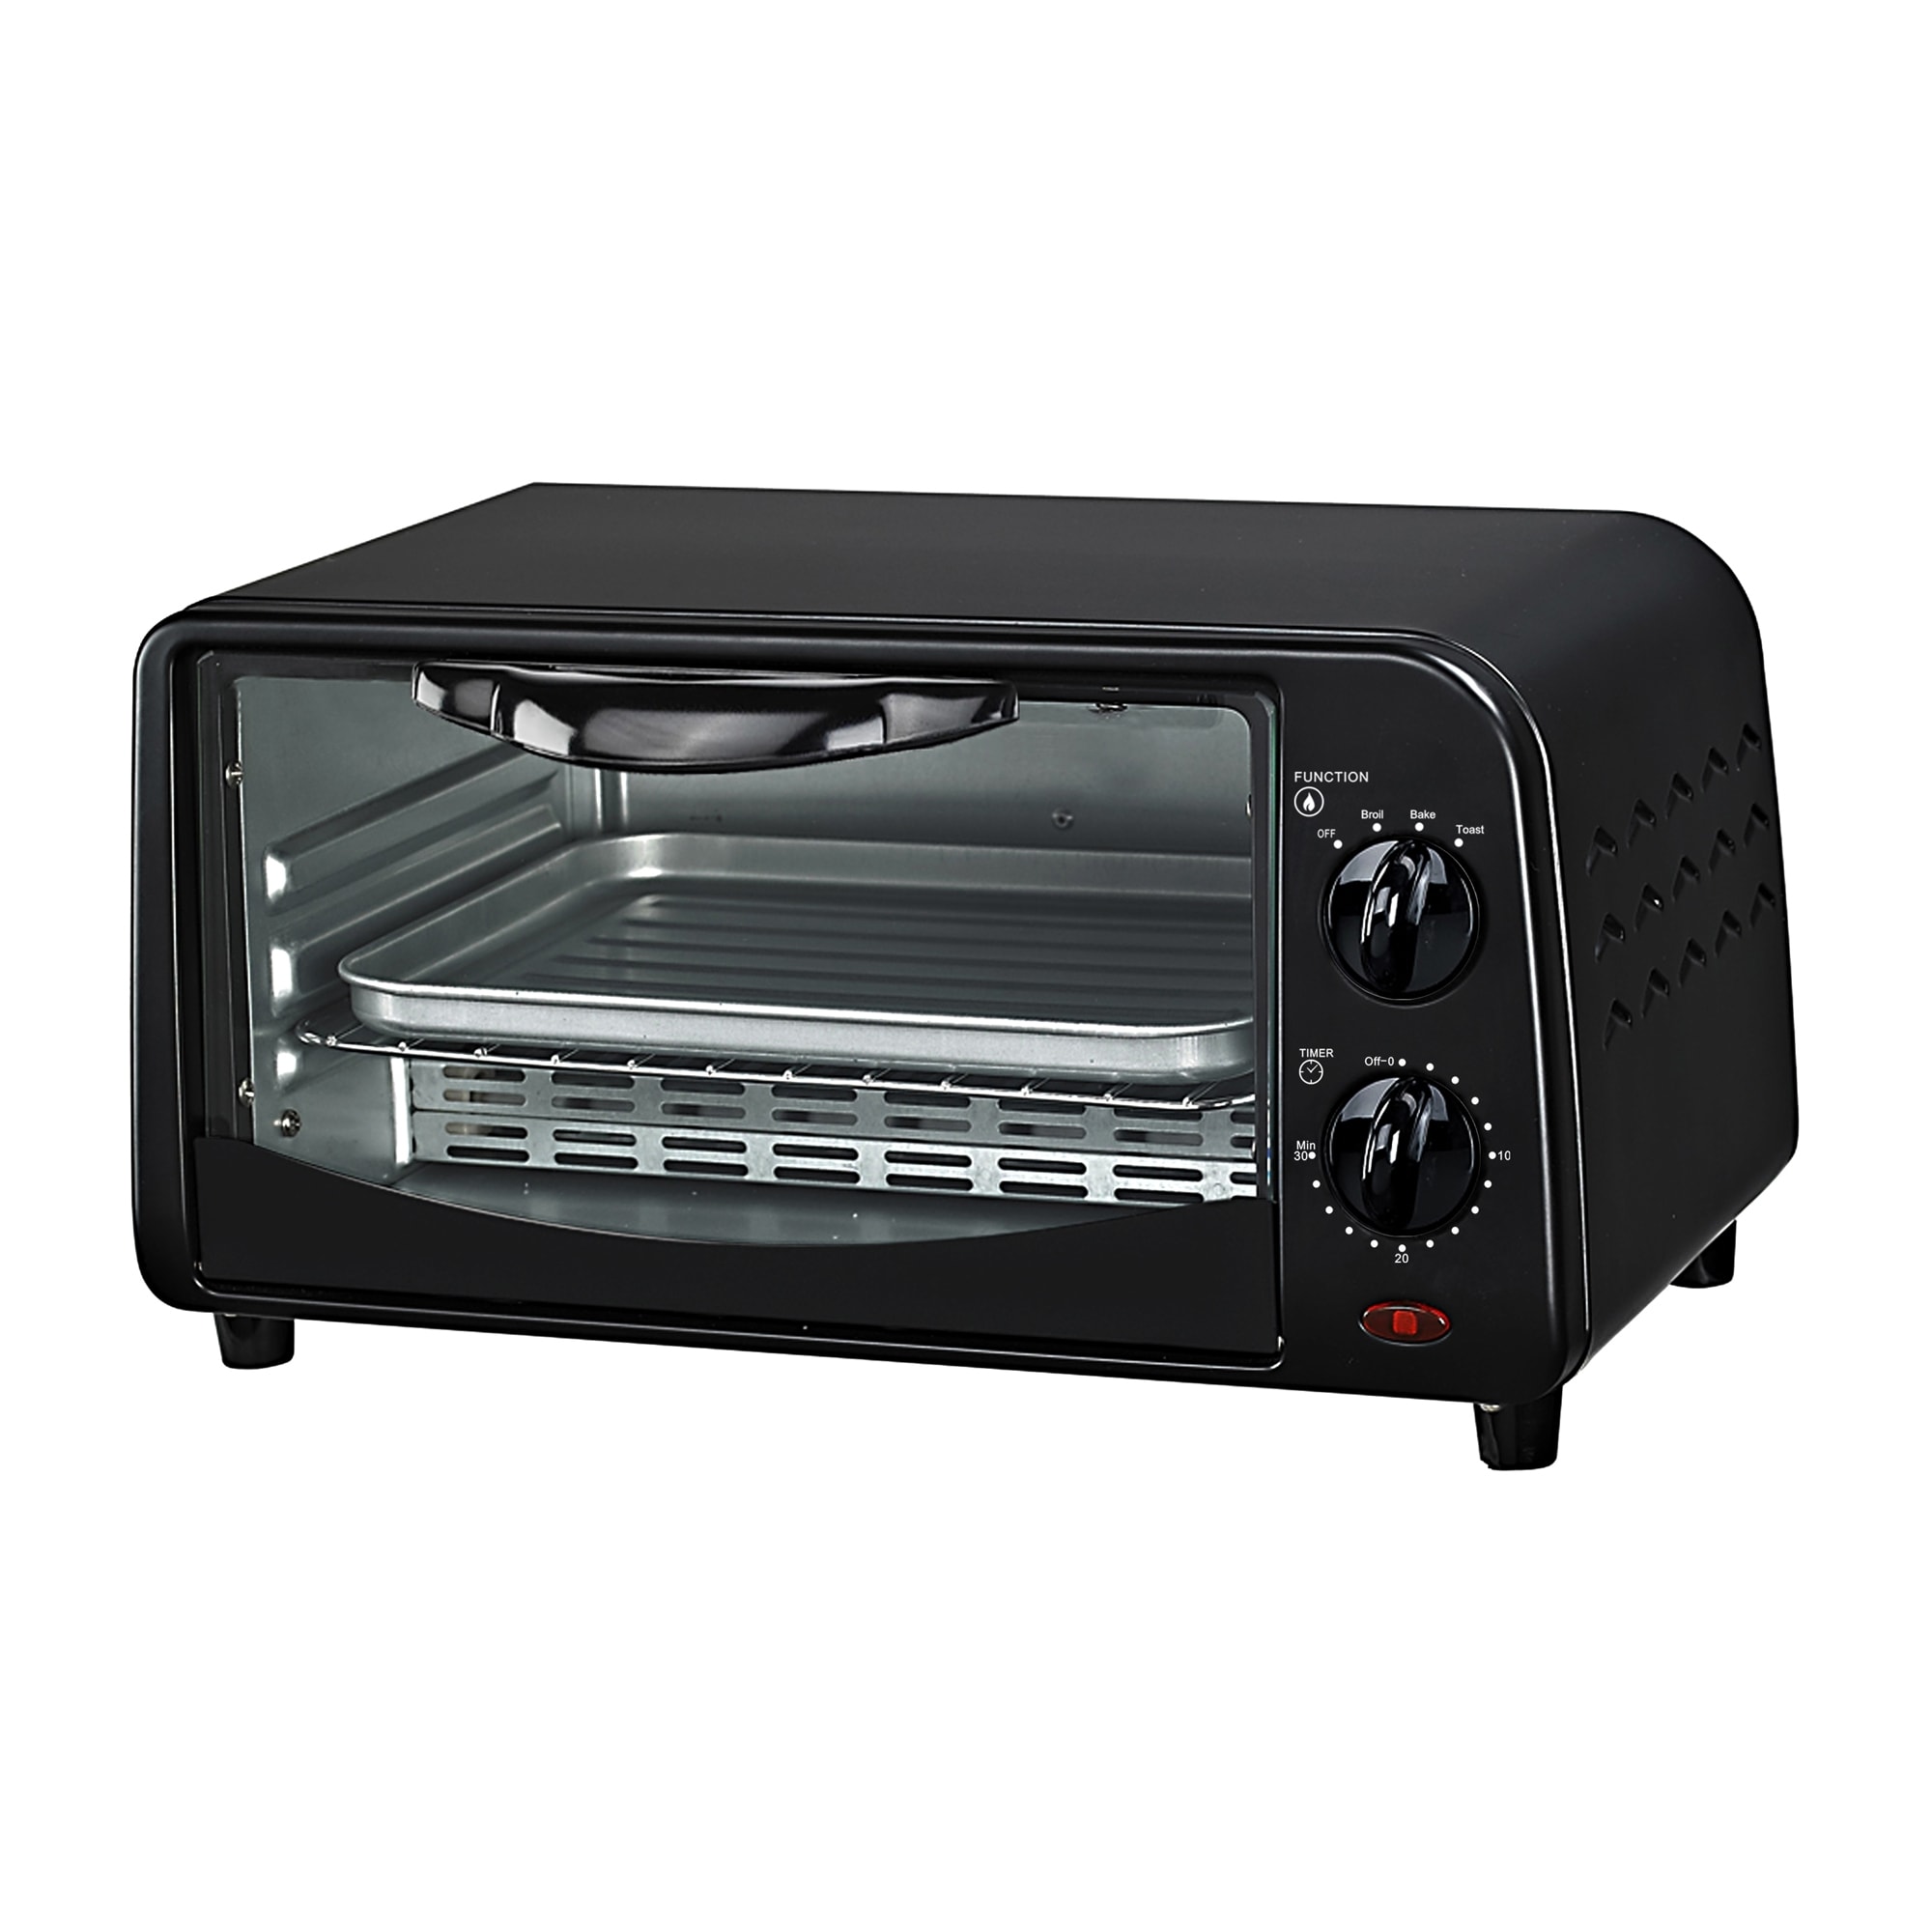 650W MINI ELECTRIC OVEN GRILL TOASTER BLACK COUNTER TABLE TOP